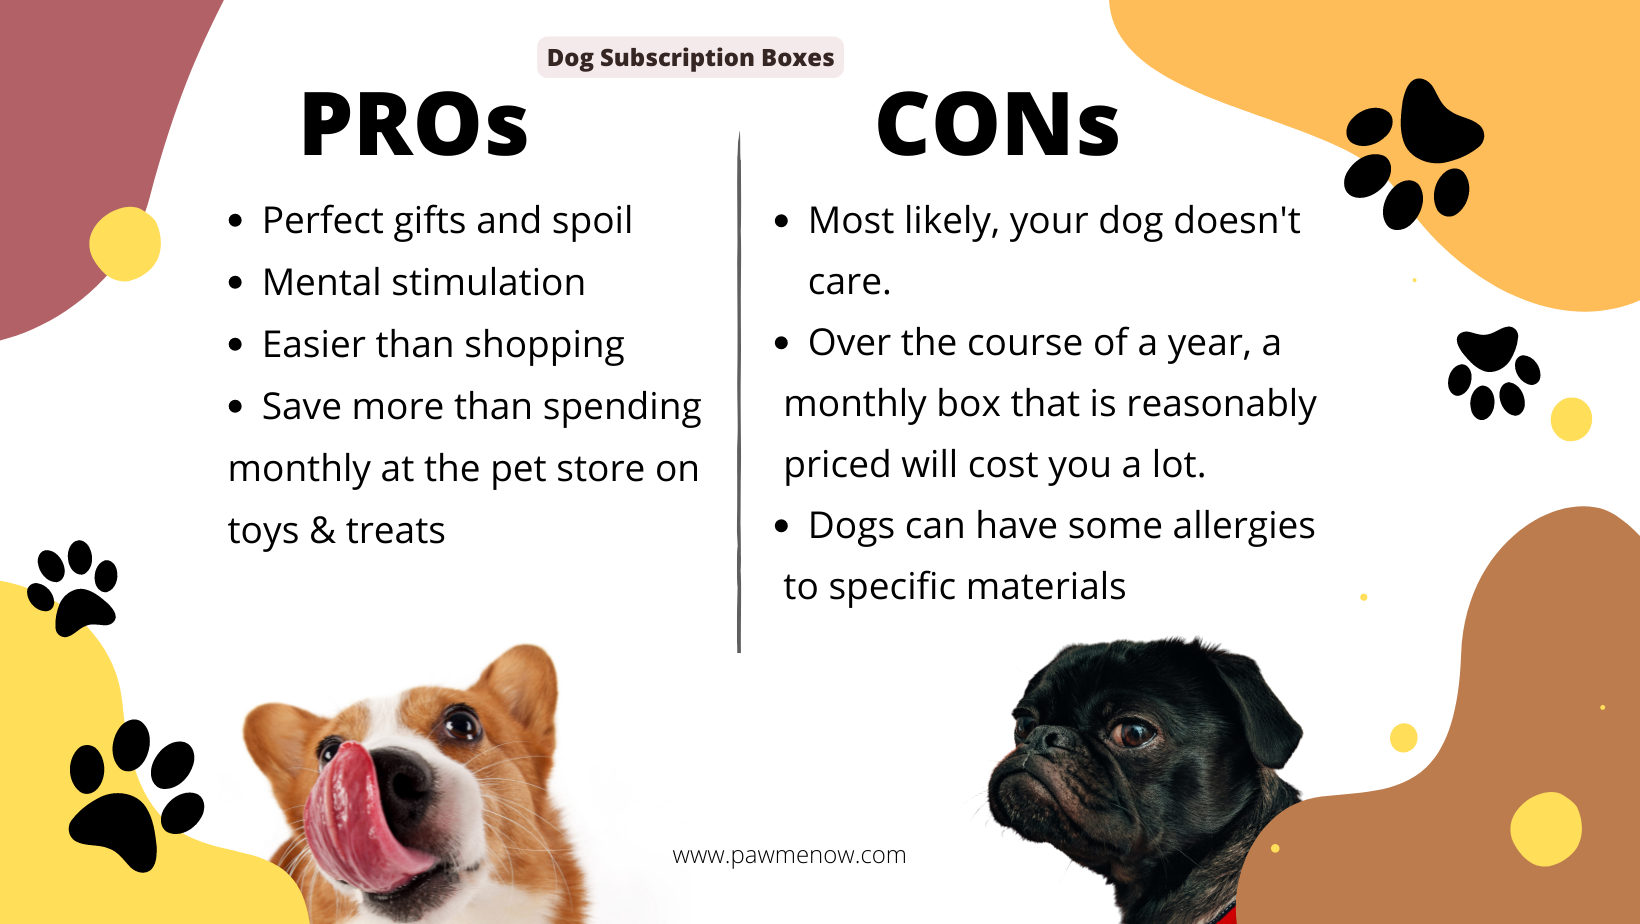 Dog subscription boxes PROs and CONs